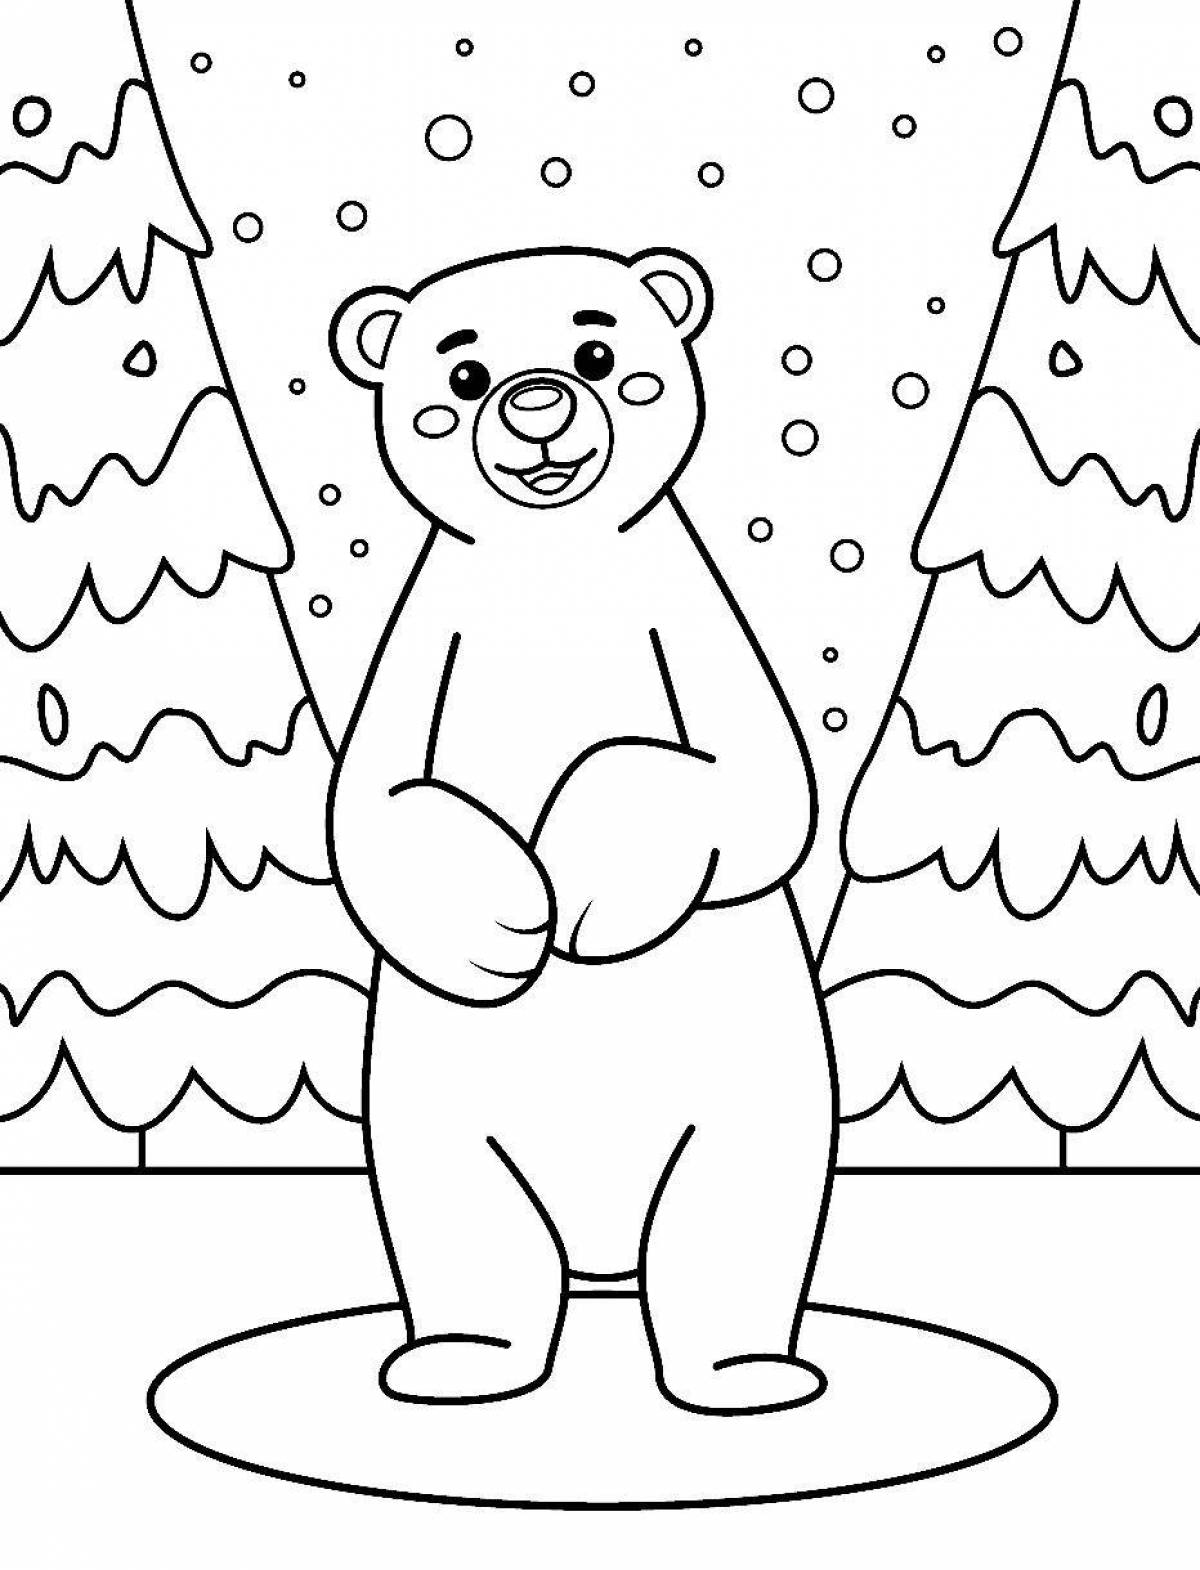 Colourful polar bear coloring book for children 2-3 years old